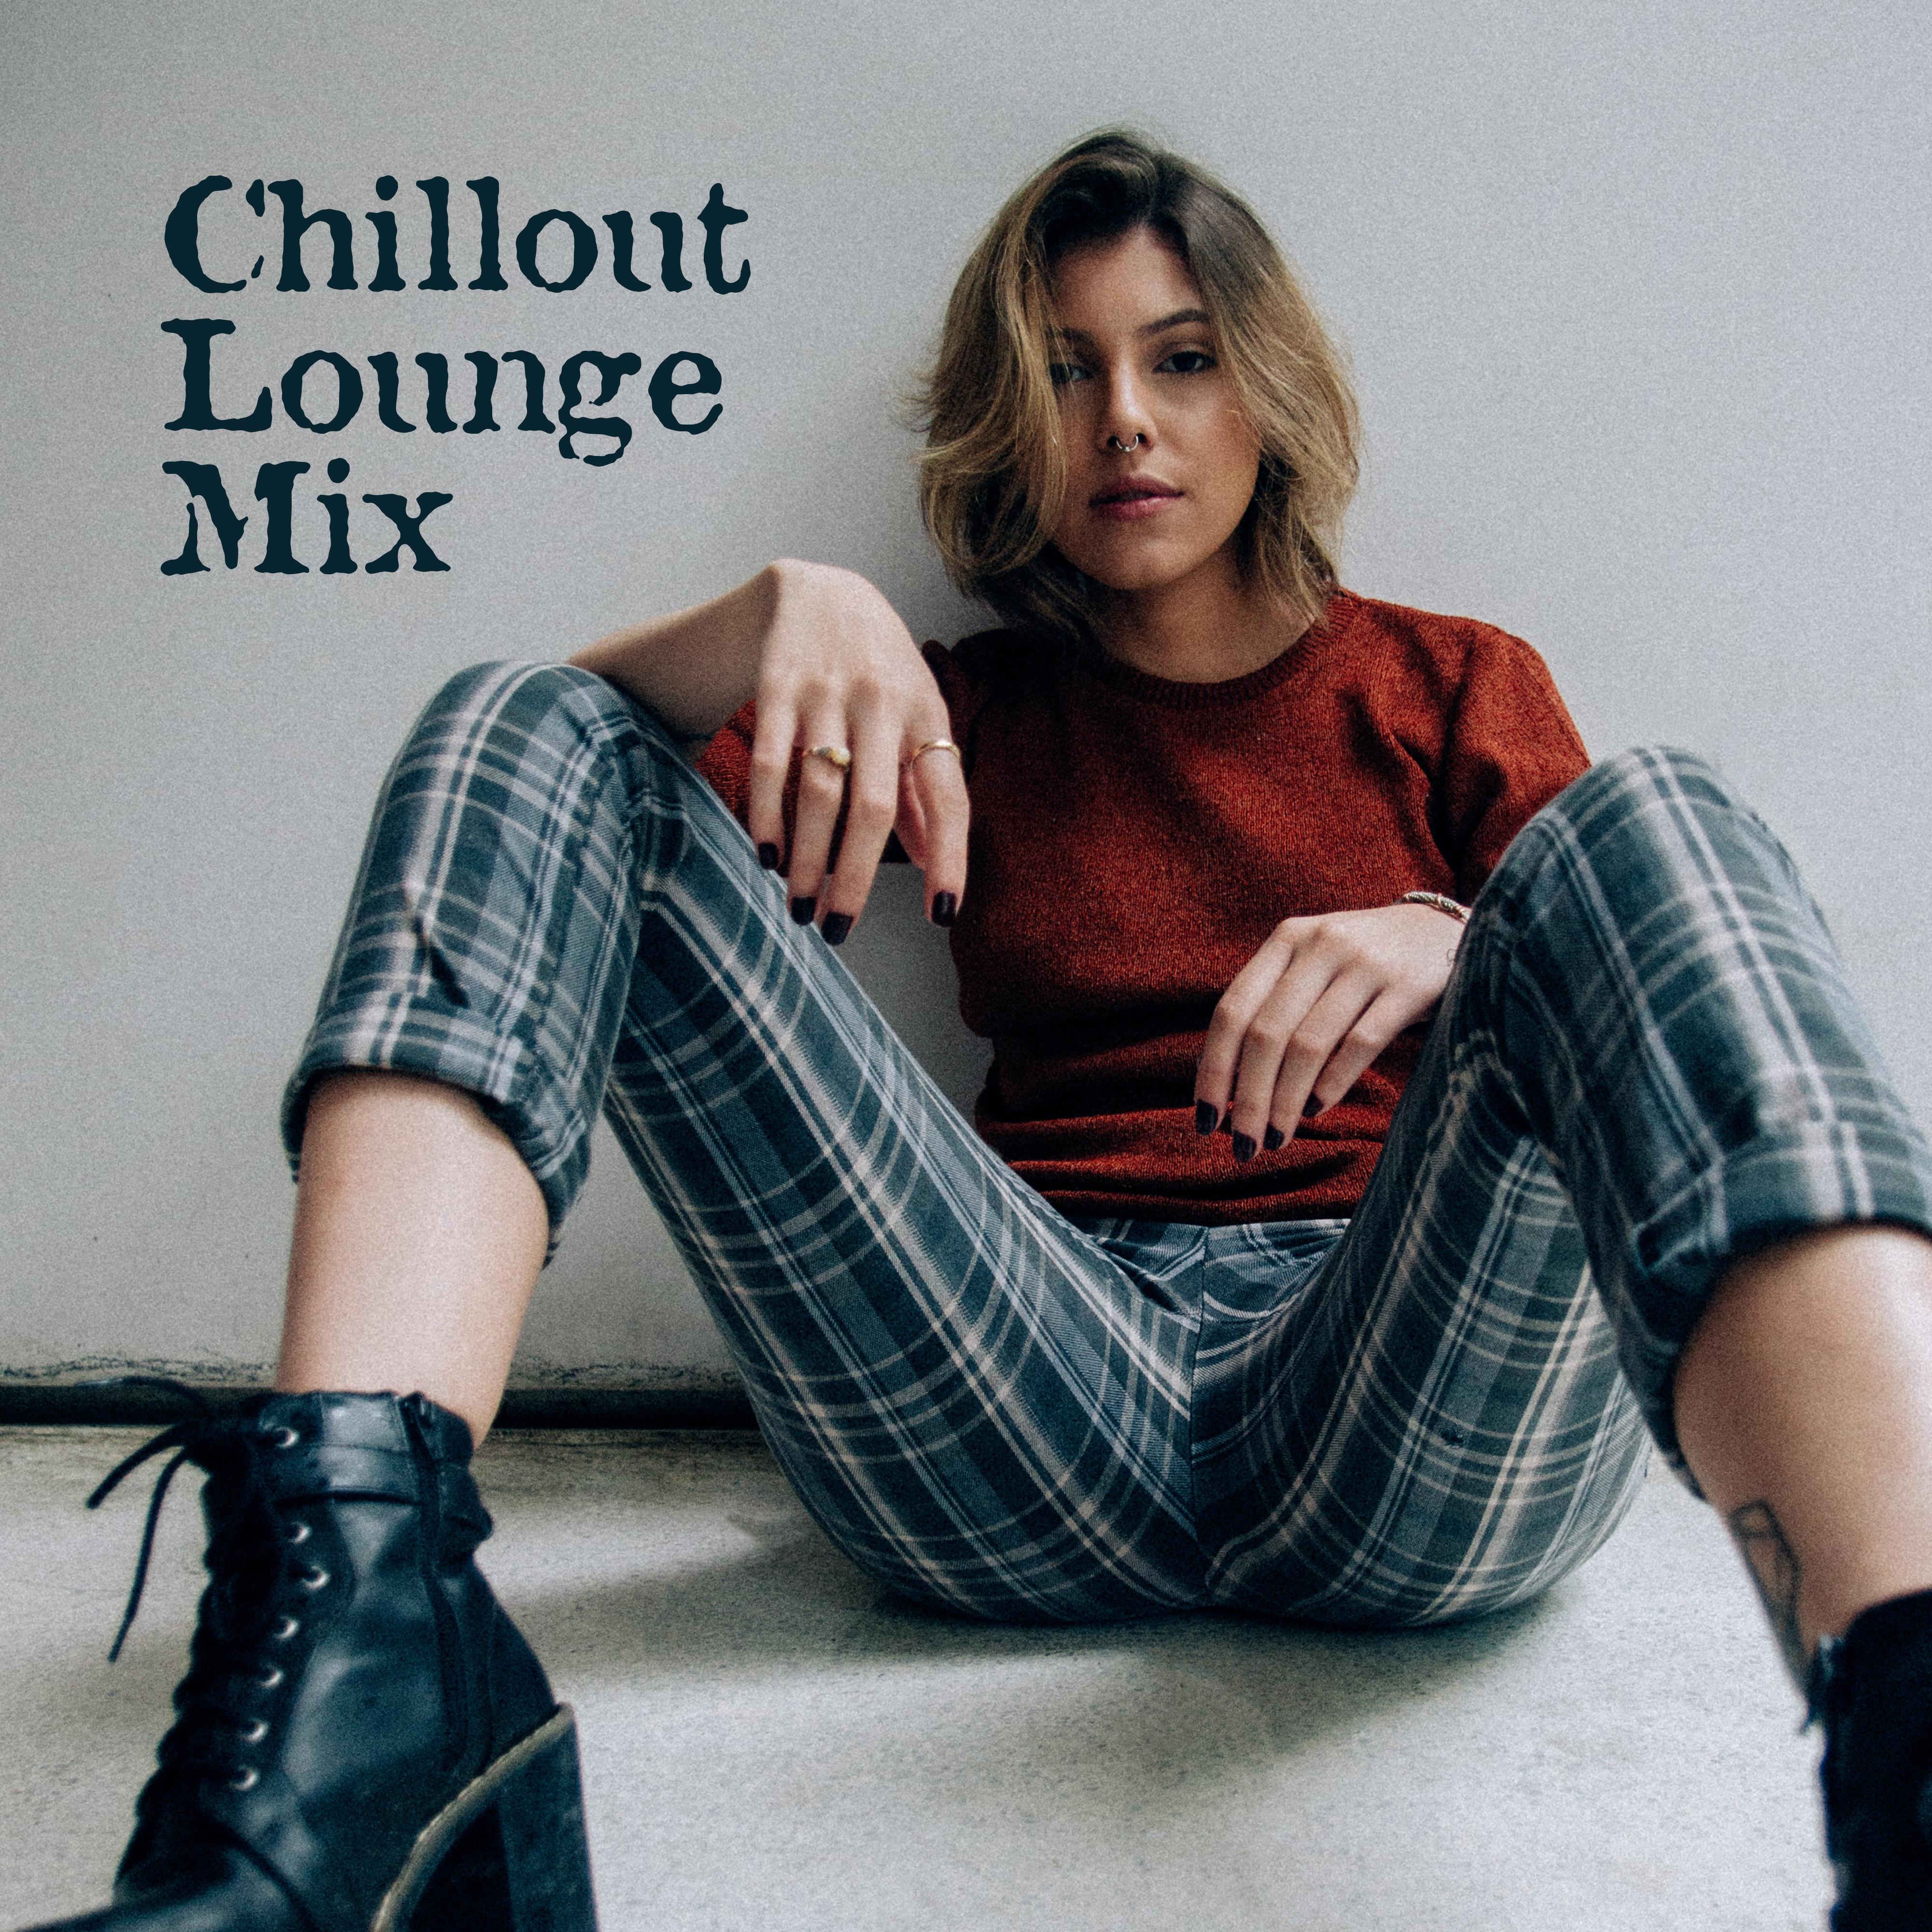 Chillout Lounge Mix  Soft Chill Out Music, Calming Vibes, Reduce Stress, Spring Chill 2019, Chillout Bar Relax